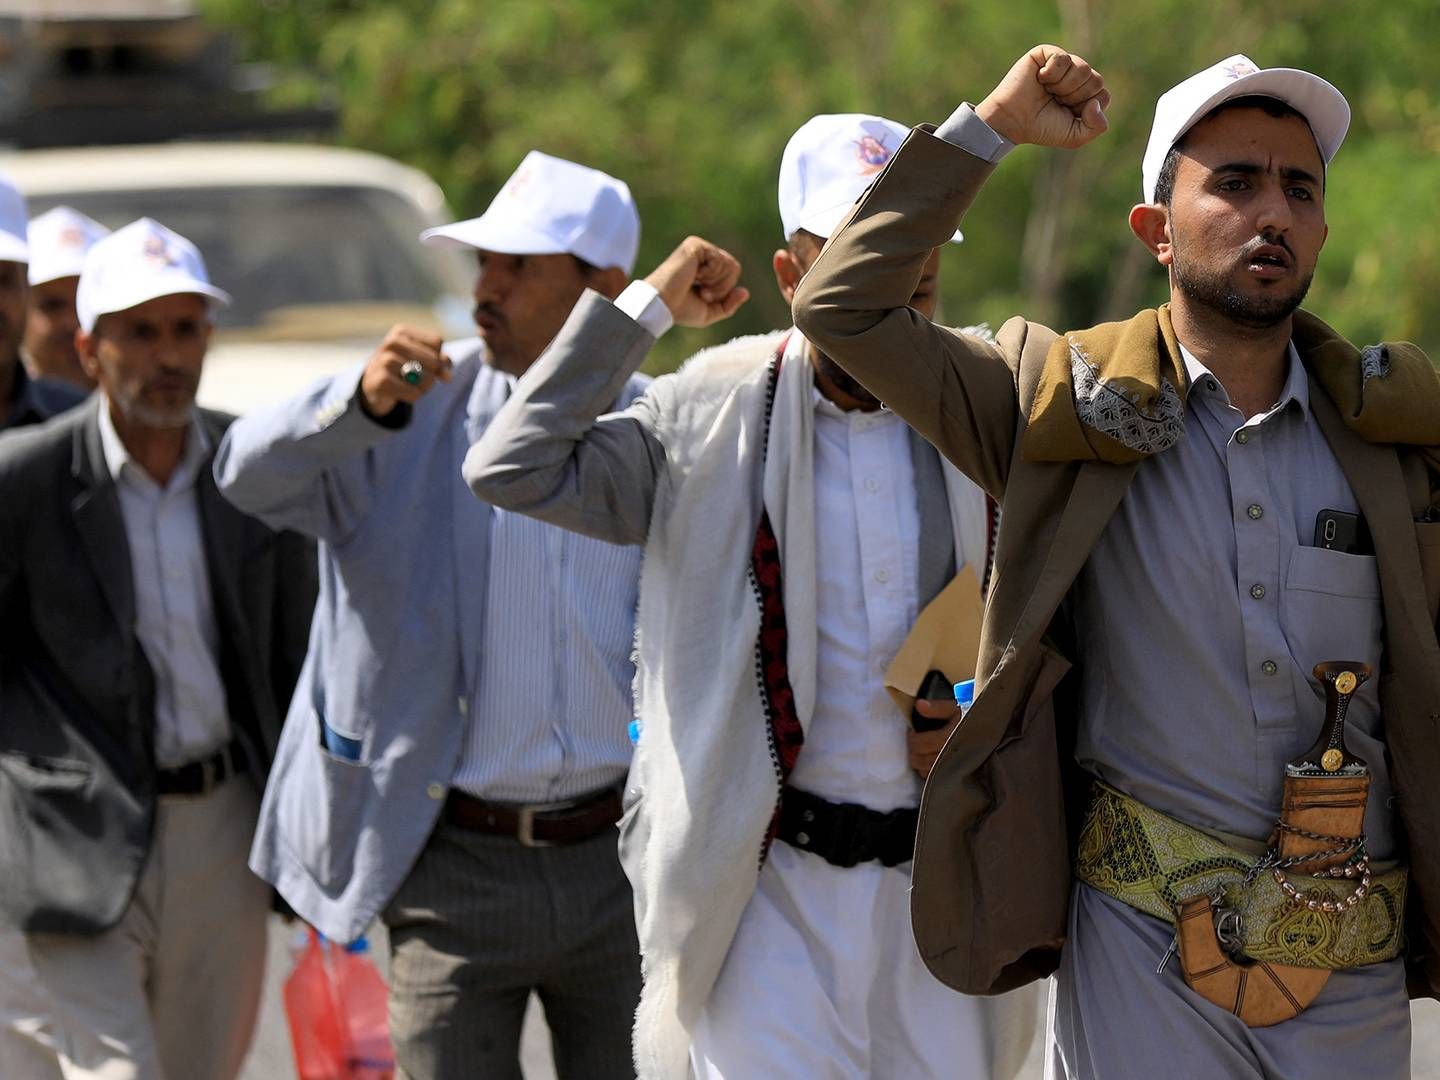 Yemenis march on June 10 to express their support for pro-Palestinian protests around the world in the Houthi-controlled capital Sanaa amid the ongoing conflict in Gaza between Israel and the militant Hamas movement as the Houthis fire on international cargo ships. | Foto: Mohammed Huwais